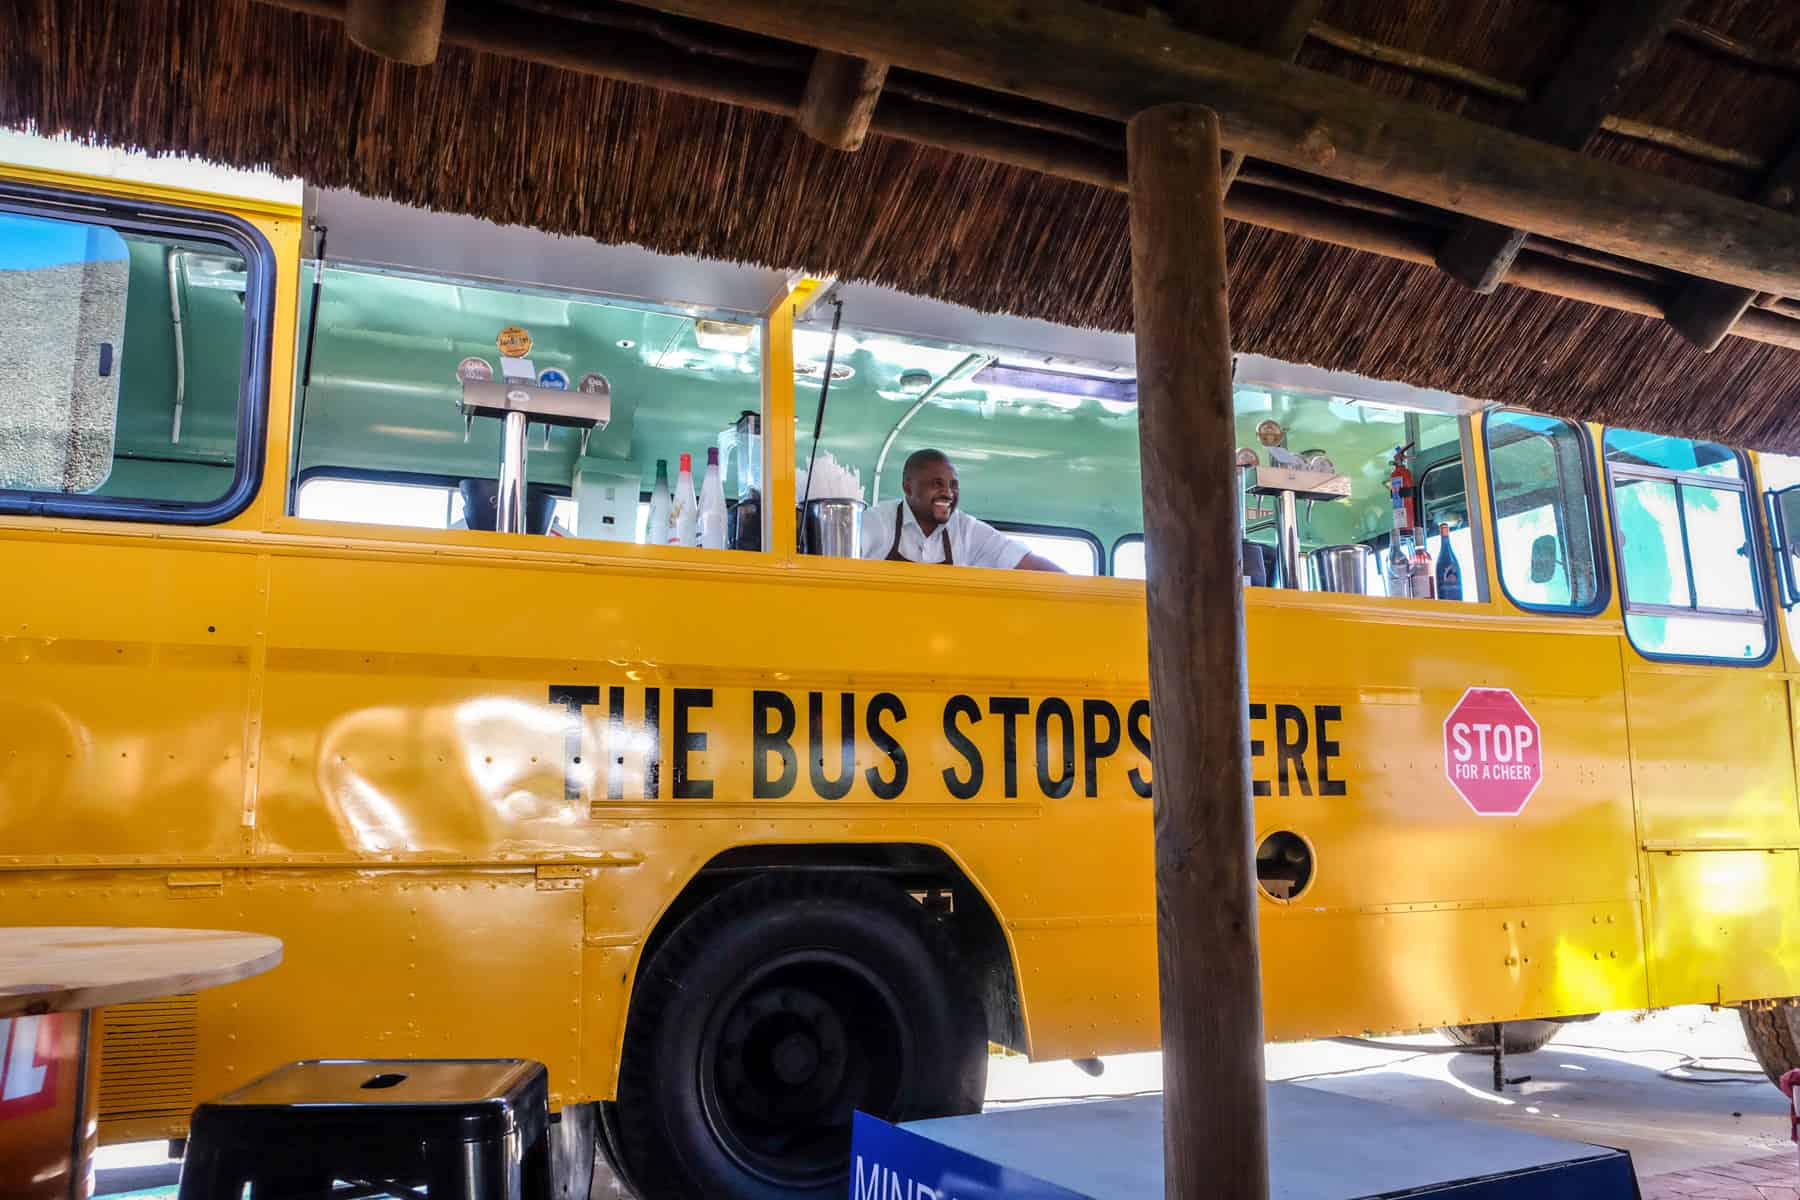 A smiling man in a white shirt stands at the counter of a refurbished yellow bus - part of the Bus Stop Cafe at Stellenbosch Vineyards 